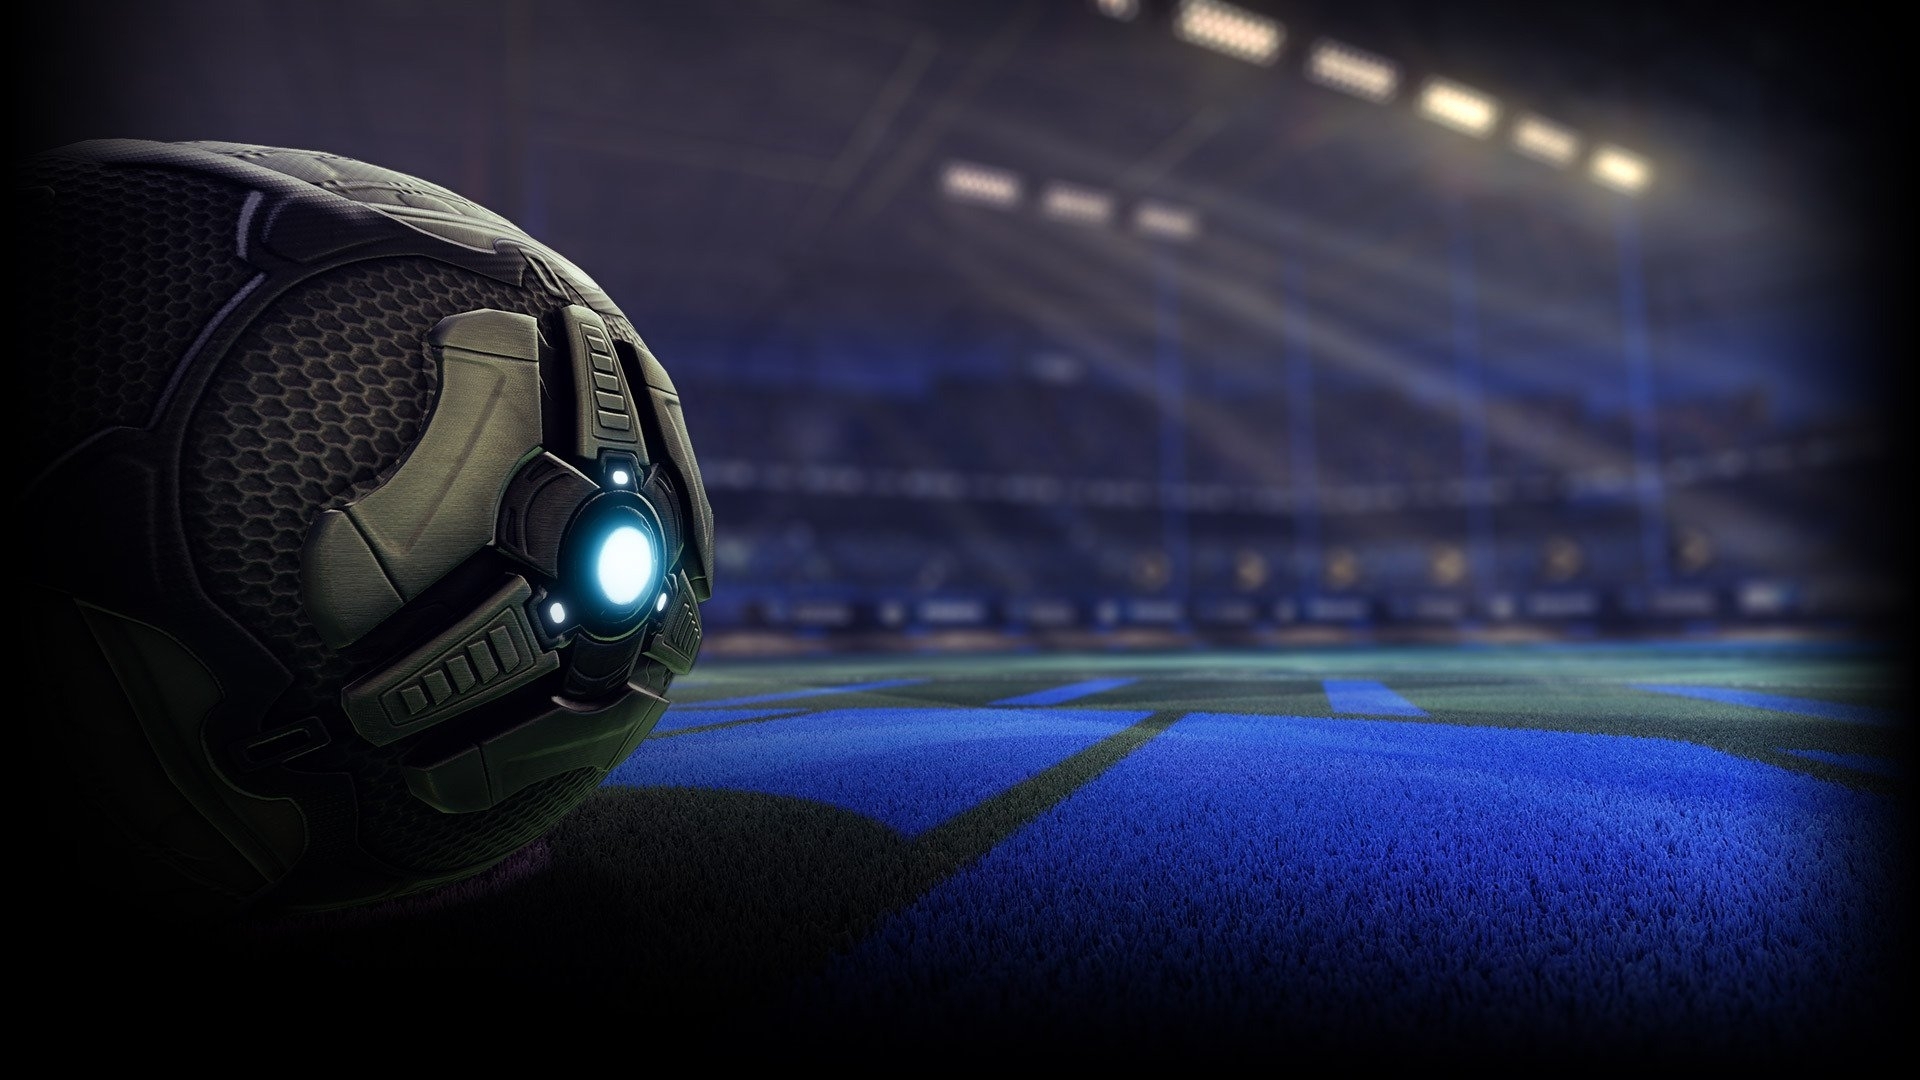 10 Latest Hd Rocket League Wallpaper FULL HD 1080p For PC Background